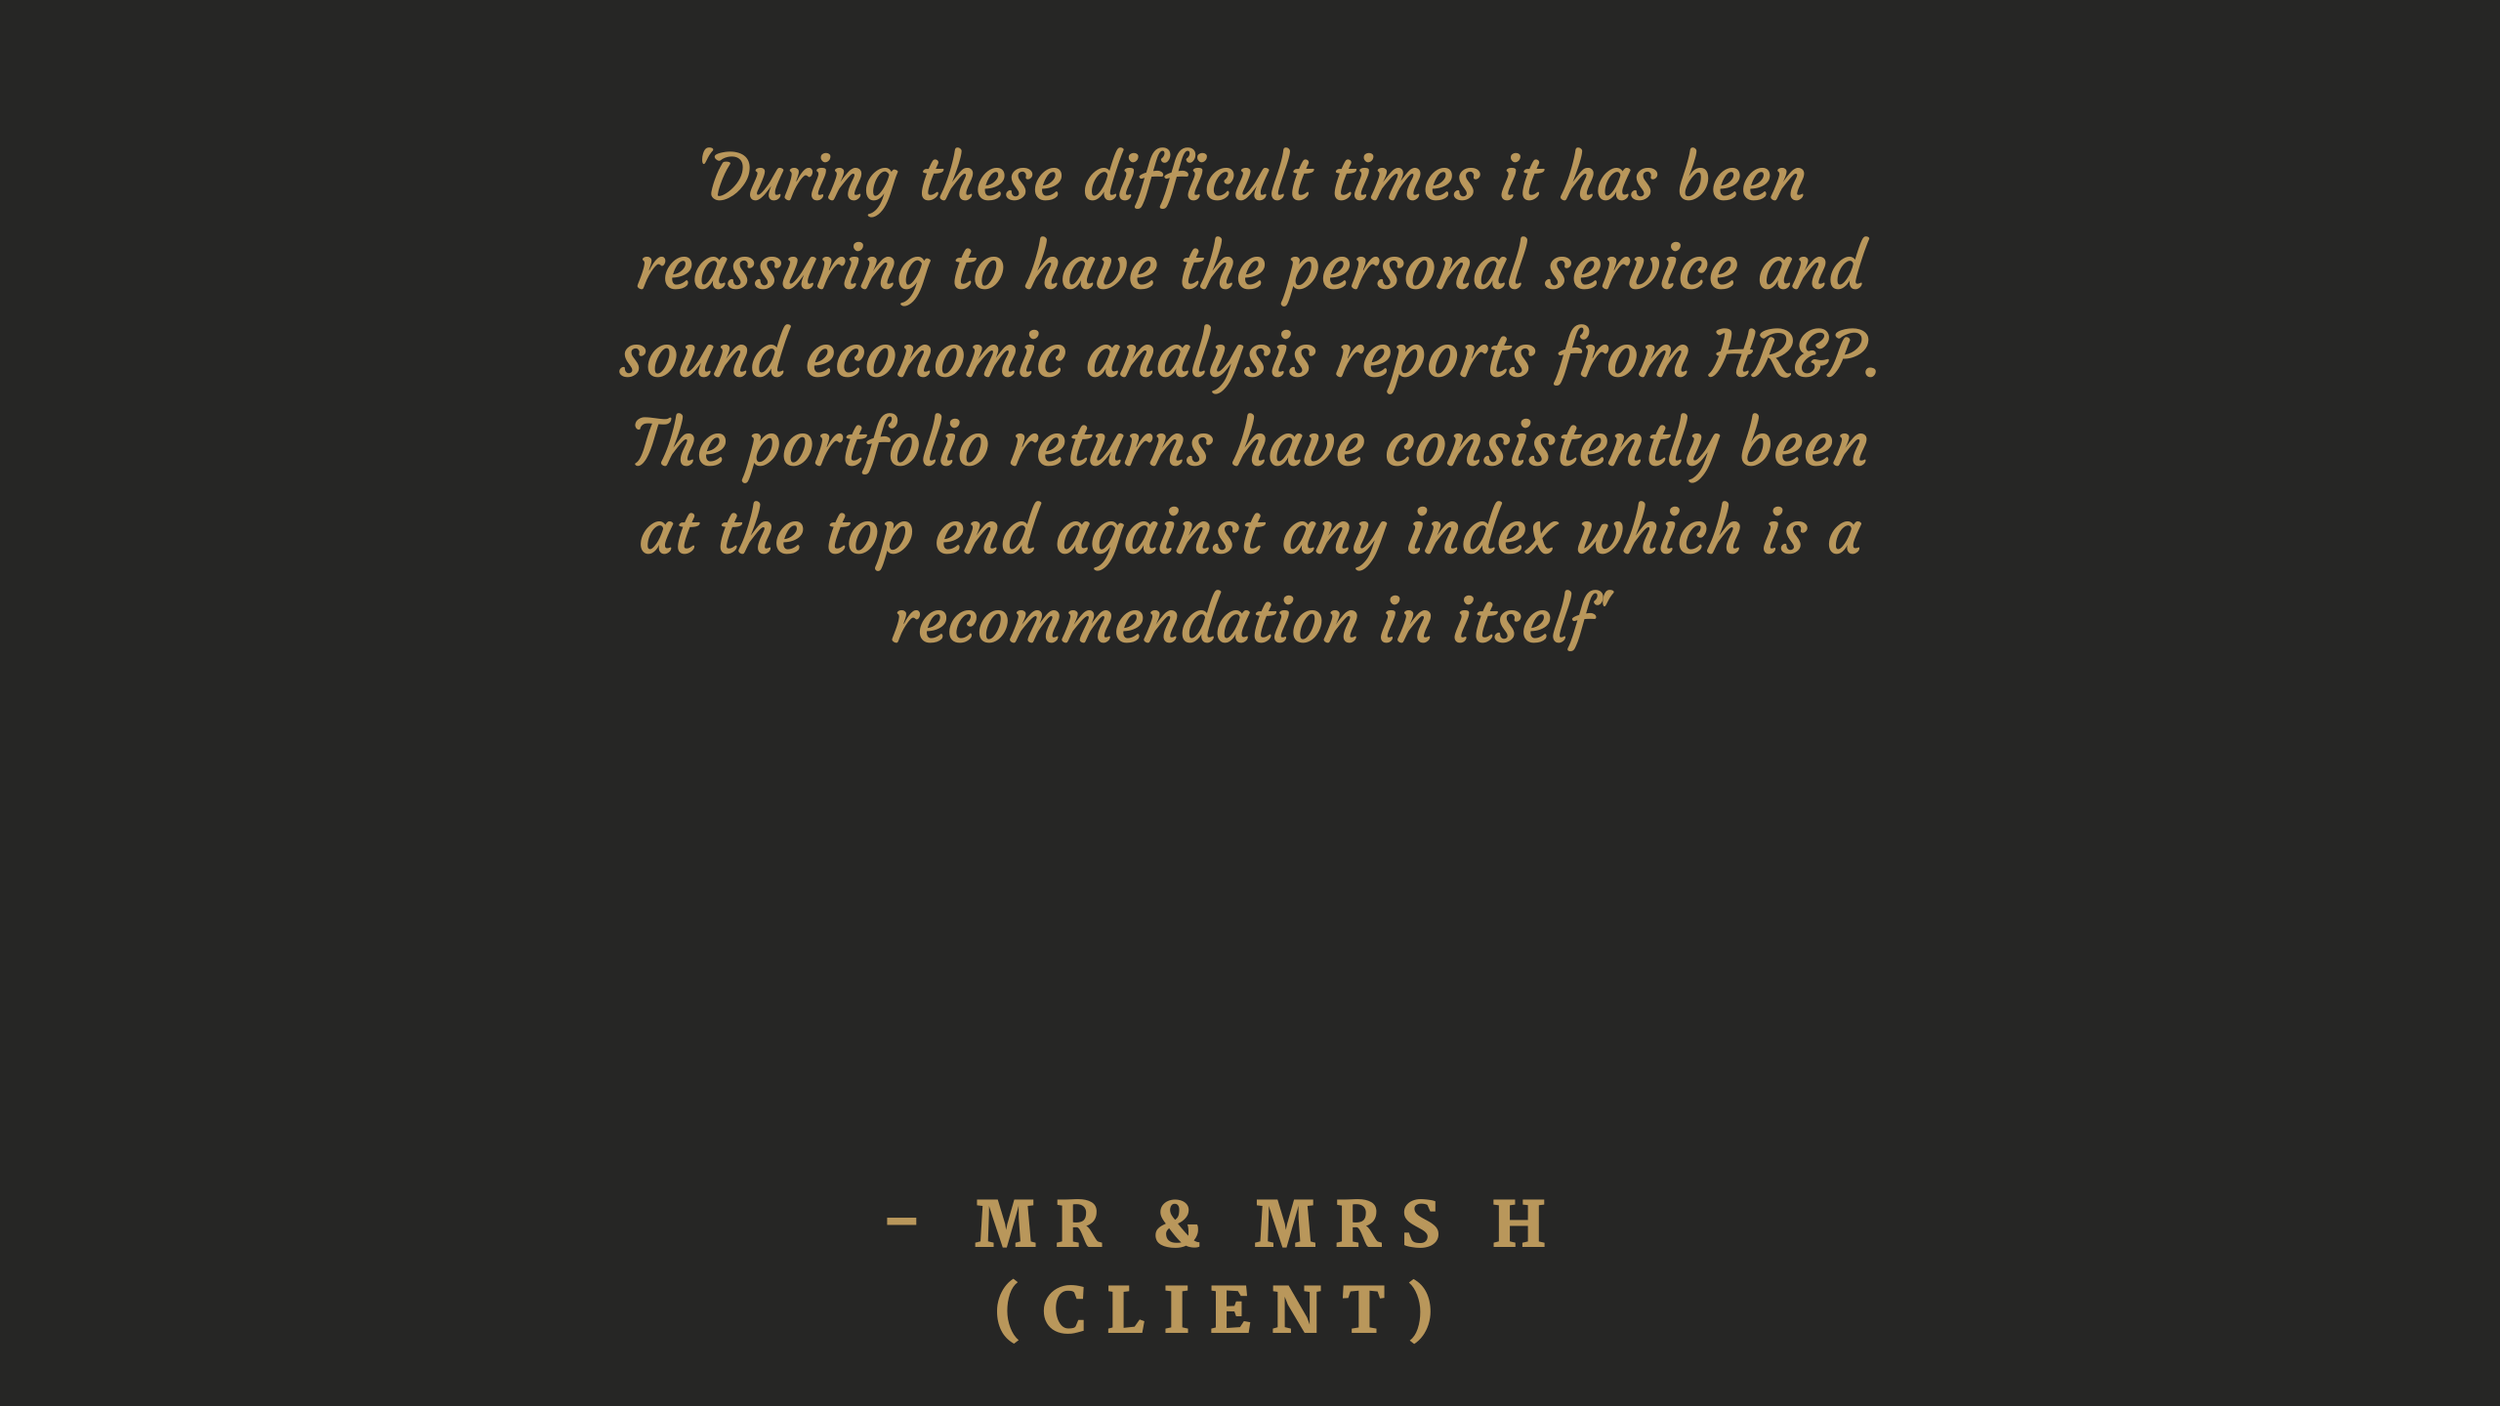 Mr and Mrs H (CLIENT) Testimonial.png